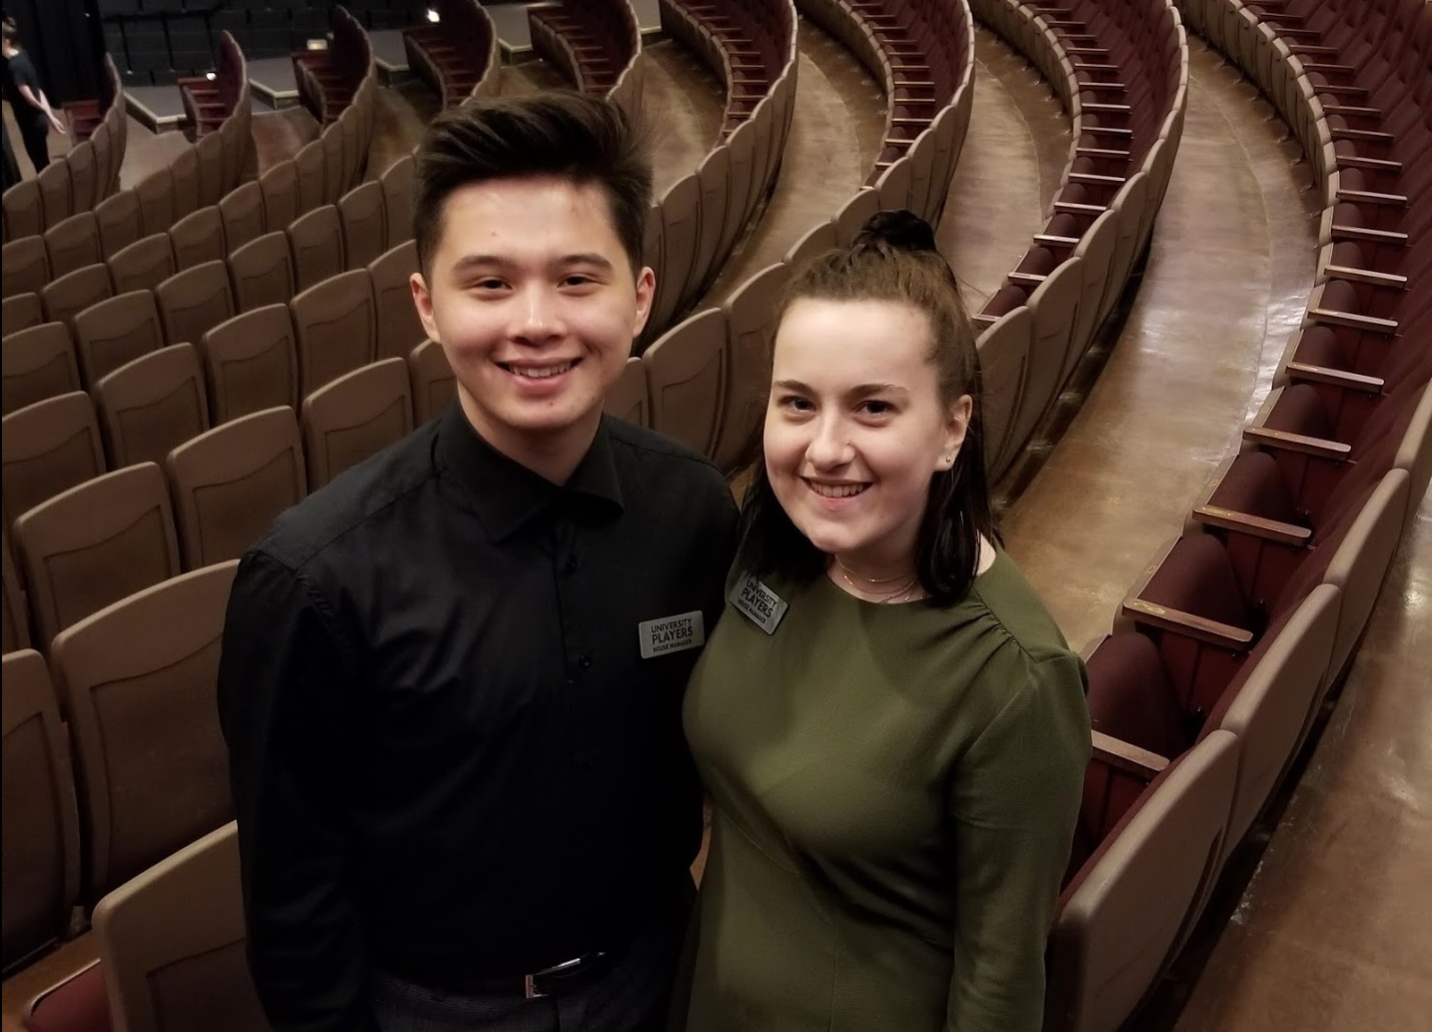 Two smiling student house managers stand in Essex Hall with rows of seating visible behind them